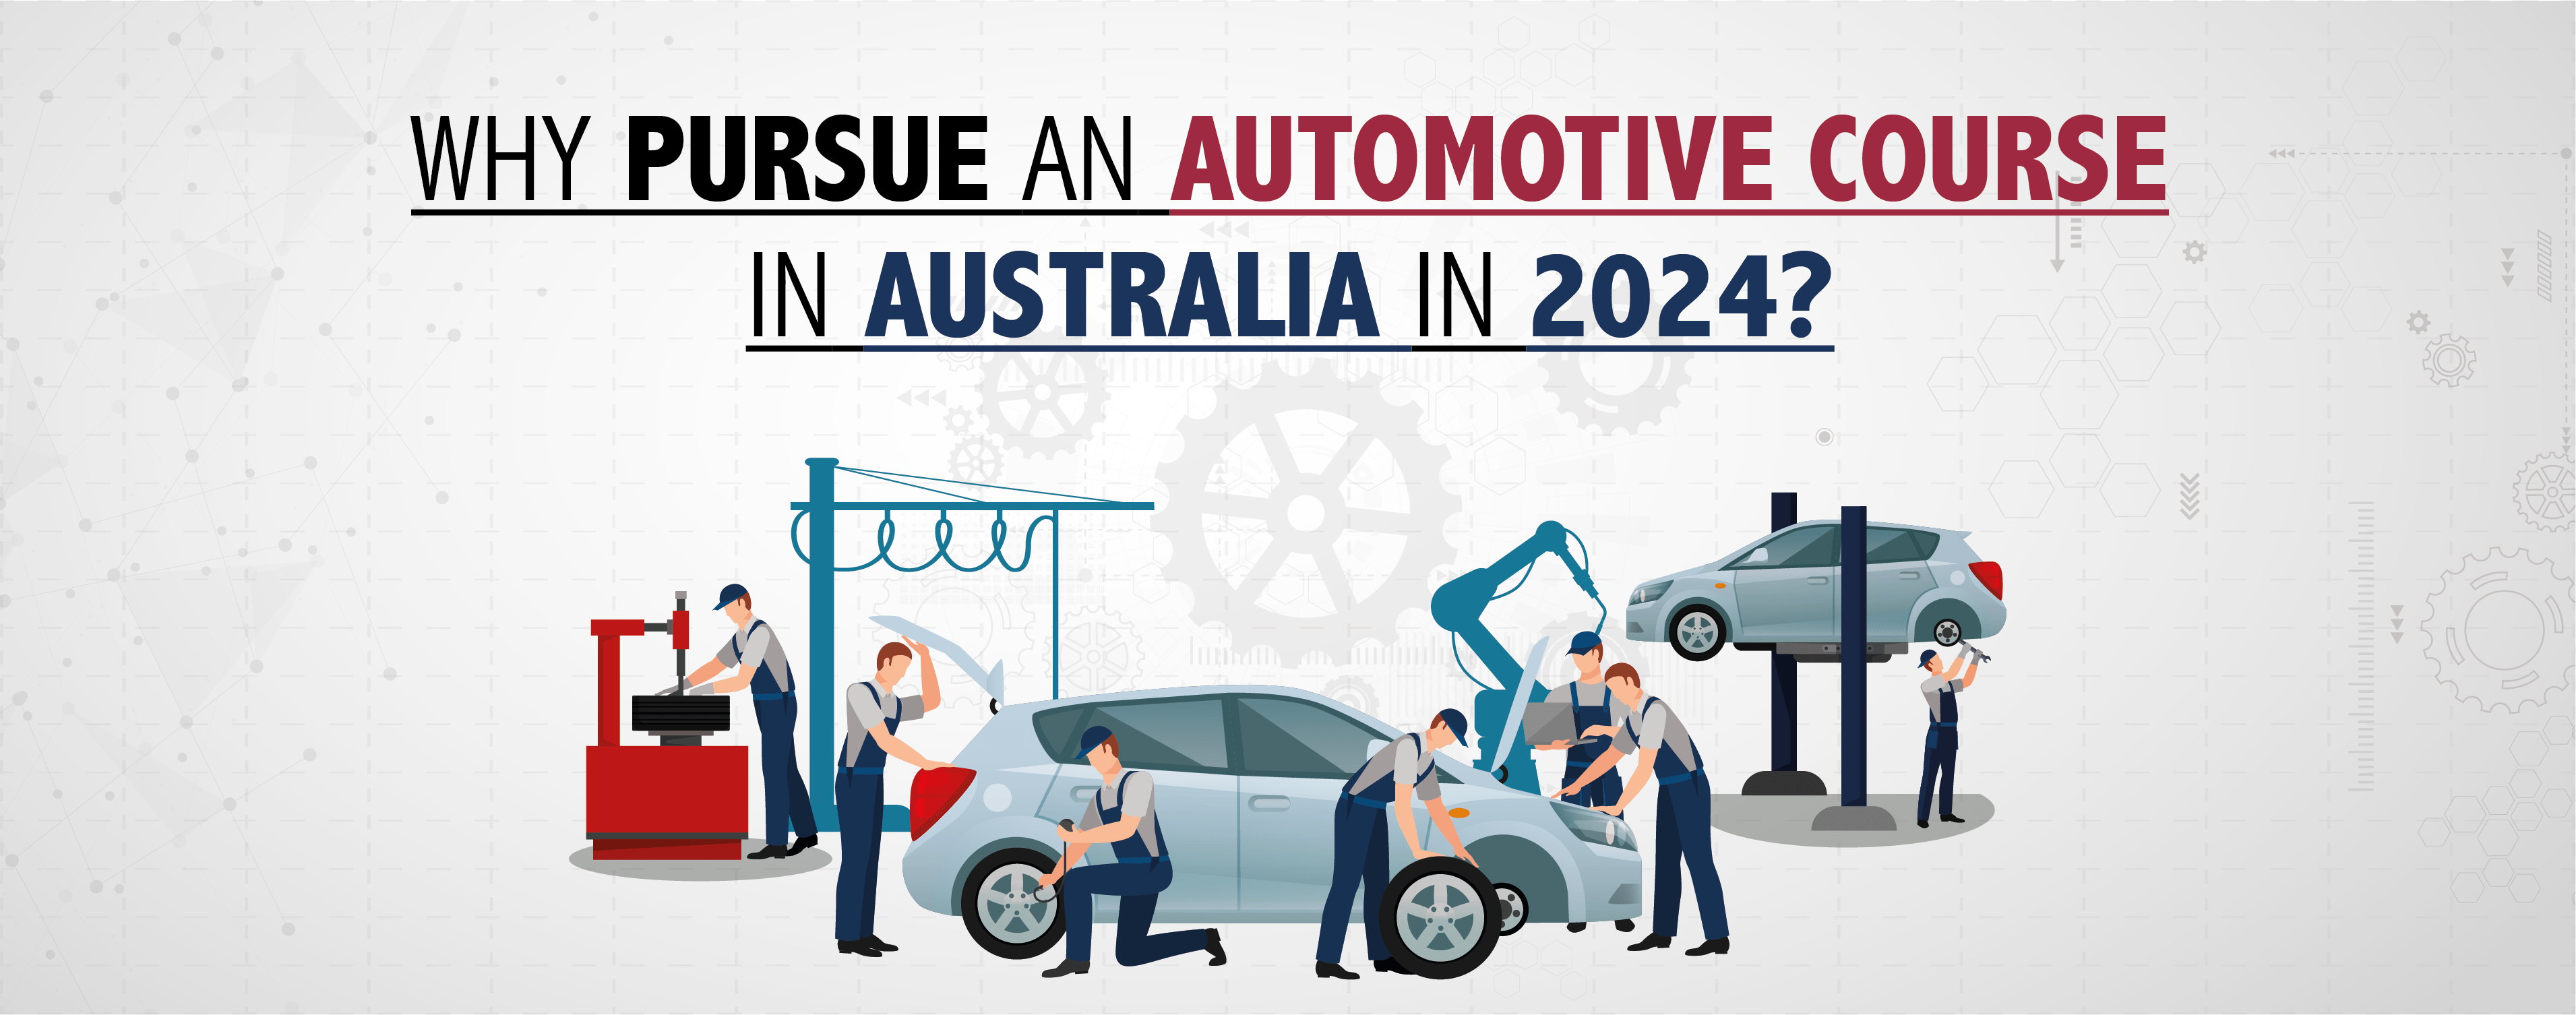 Why Pursue an Automotive Course in Australia in 2024?